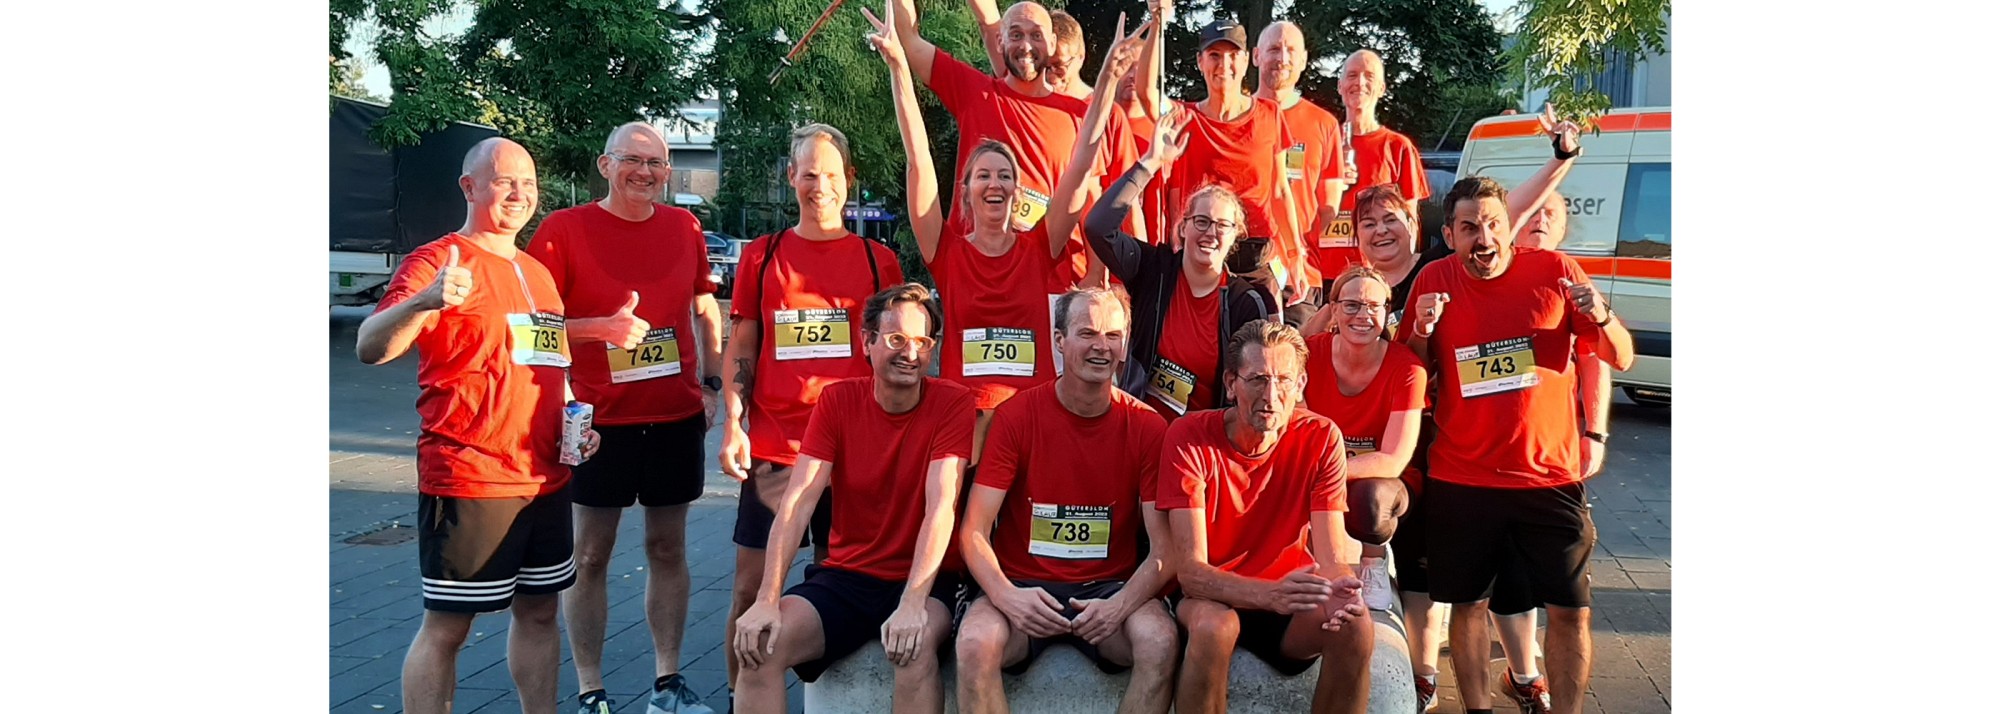 AOK-company run Gütersloh: One for all, all for one.